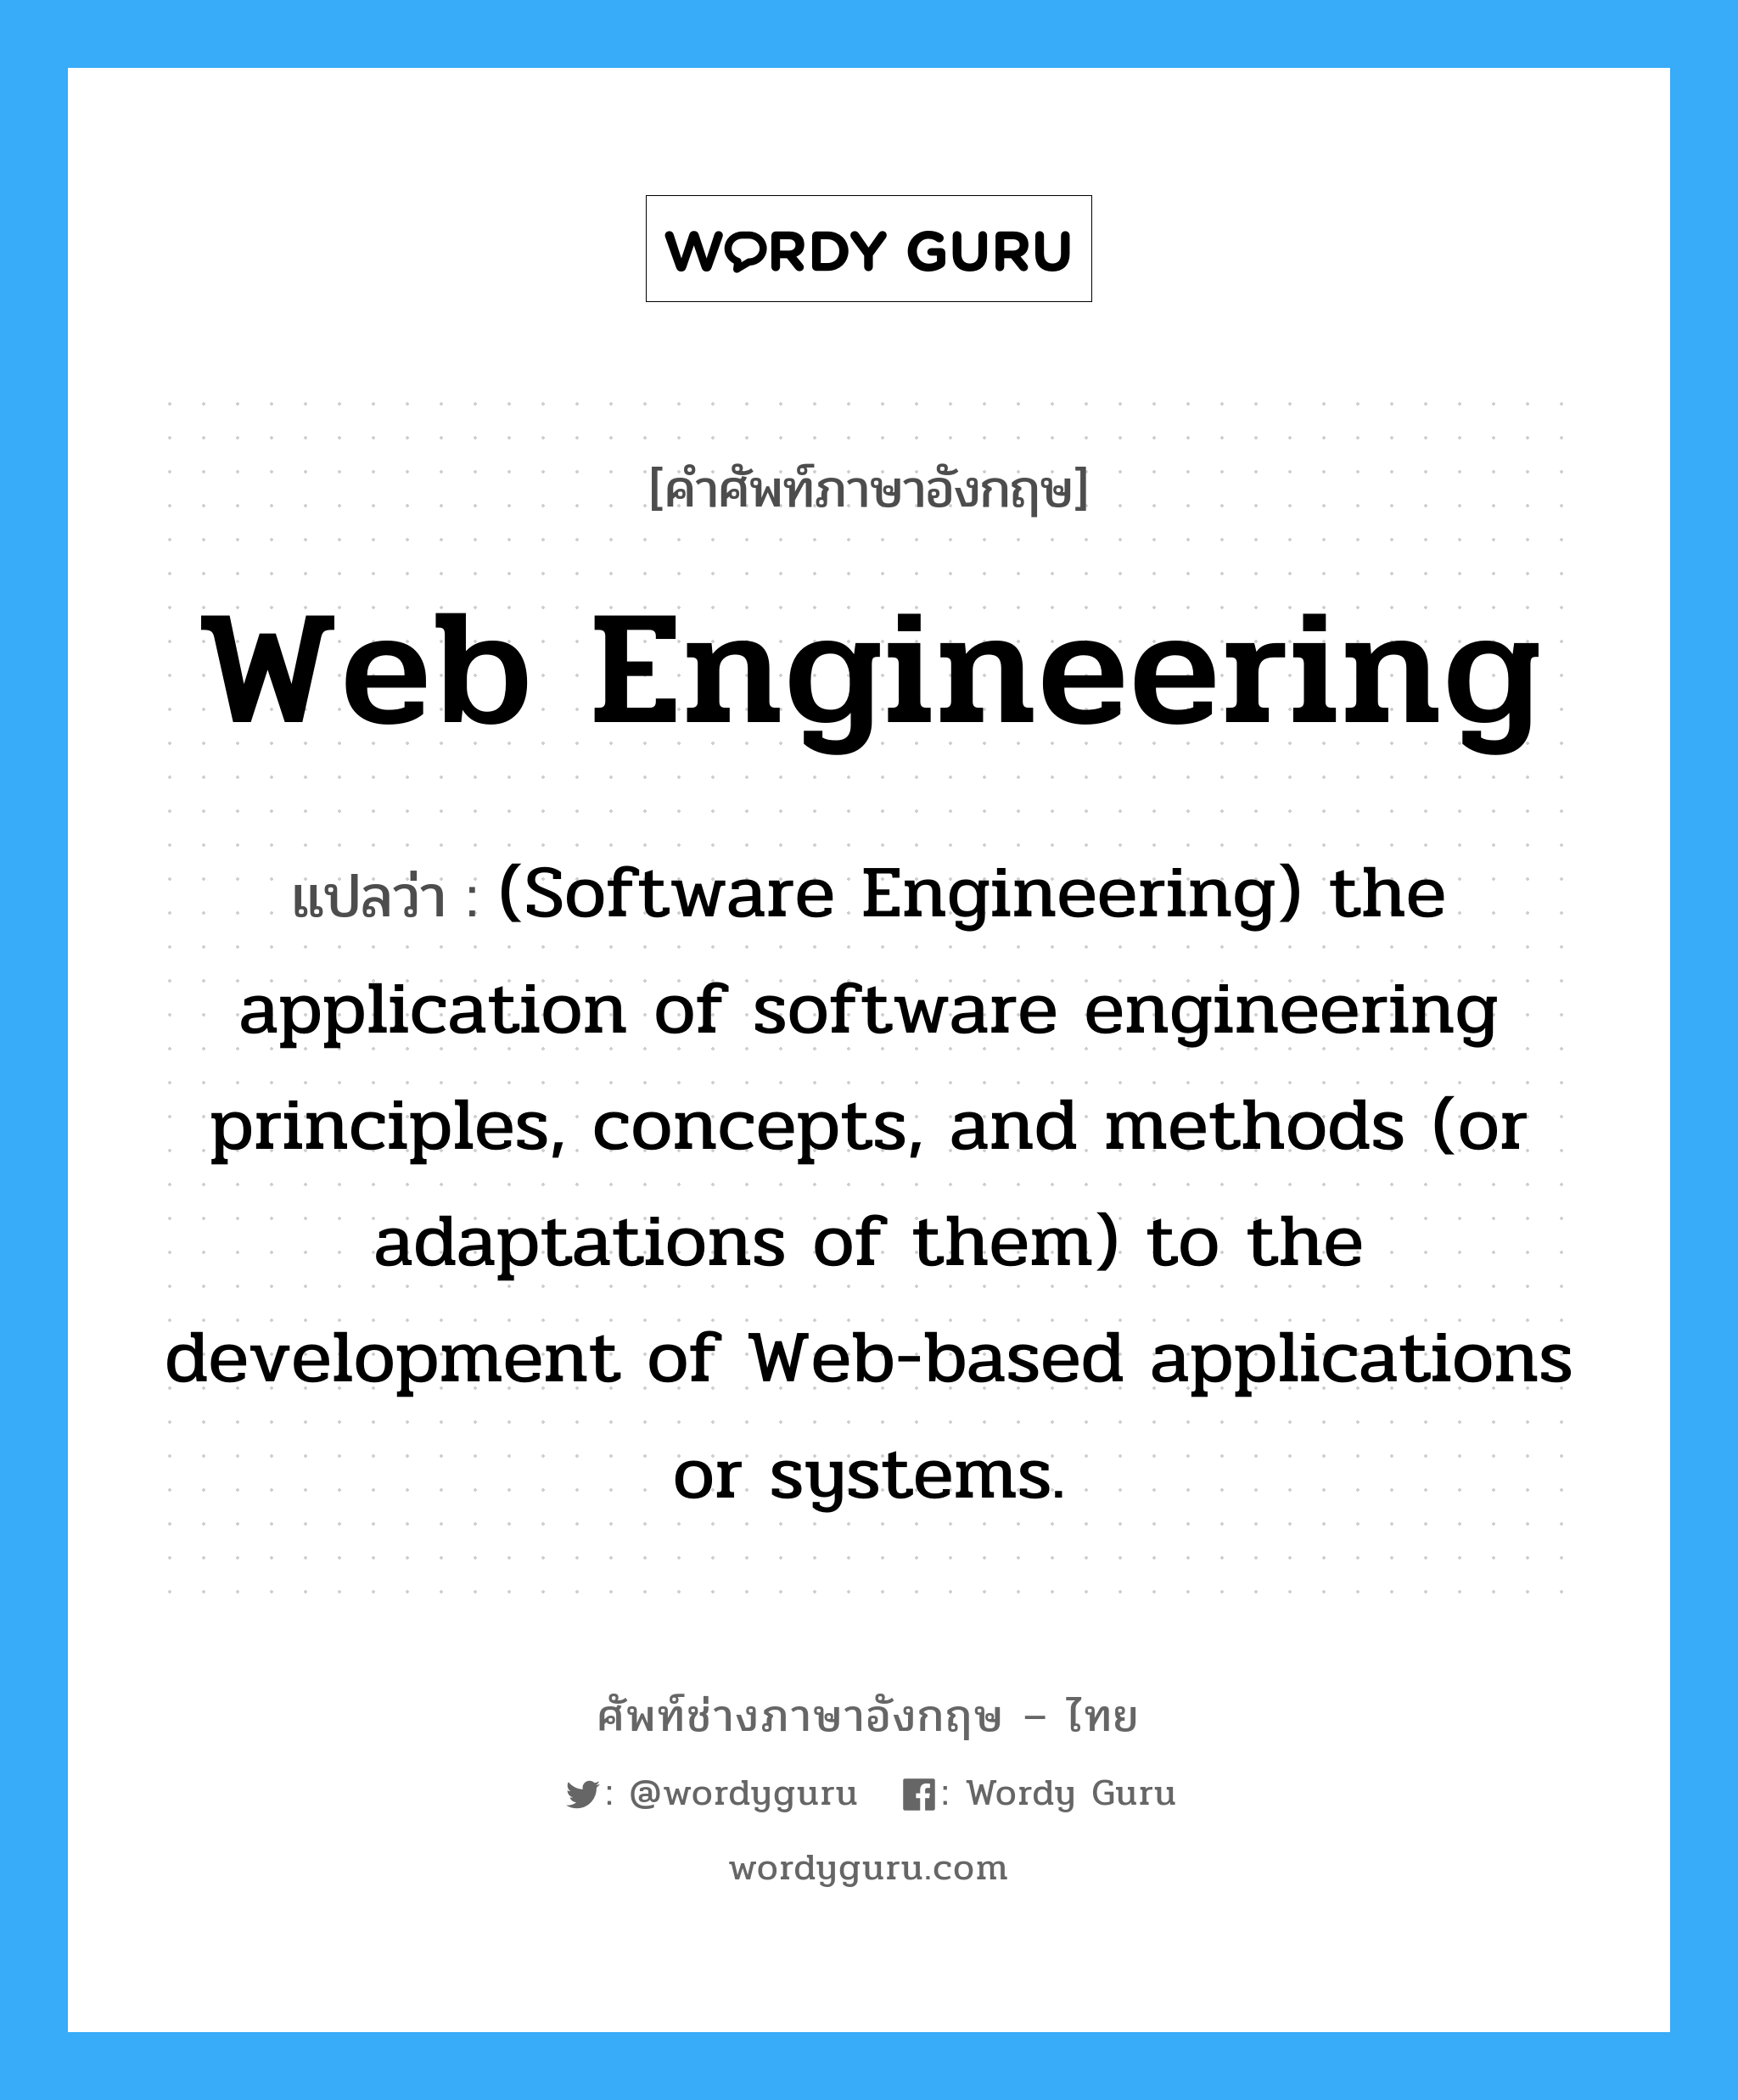 Web engineering แปลว่า?, คำศัพท์ช่างภาษาอังกฤษ - ไทย Web engineering คำศัพท์ภาษาอังกฤษ Web engineering แปลว่า (Software Engineering) the application of software engineering principles, concepts, and methods (or adaptations of them) to the development of Web-based applications or systems.